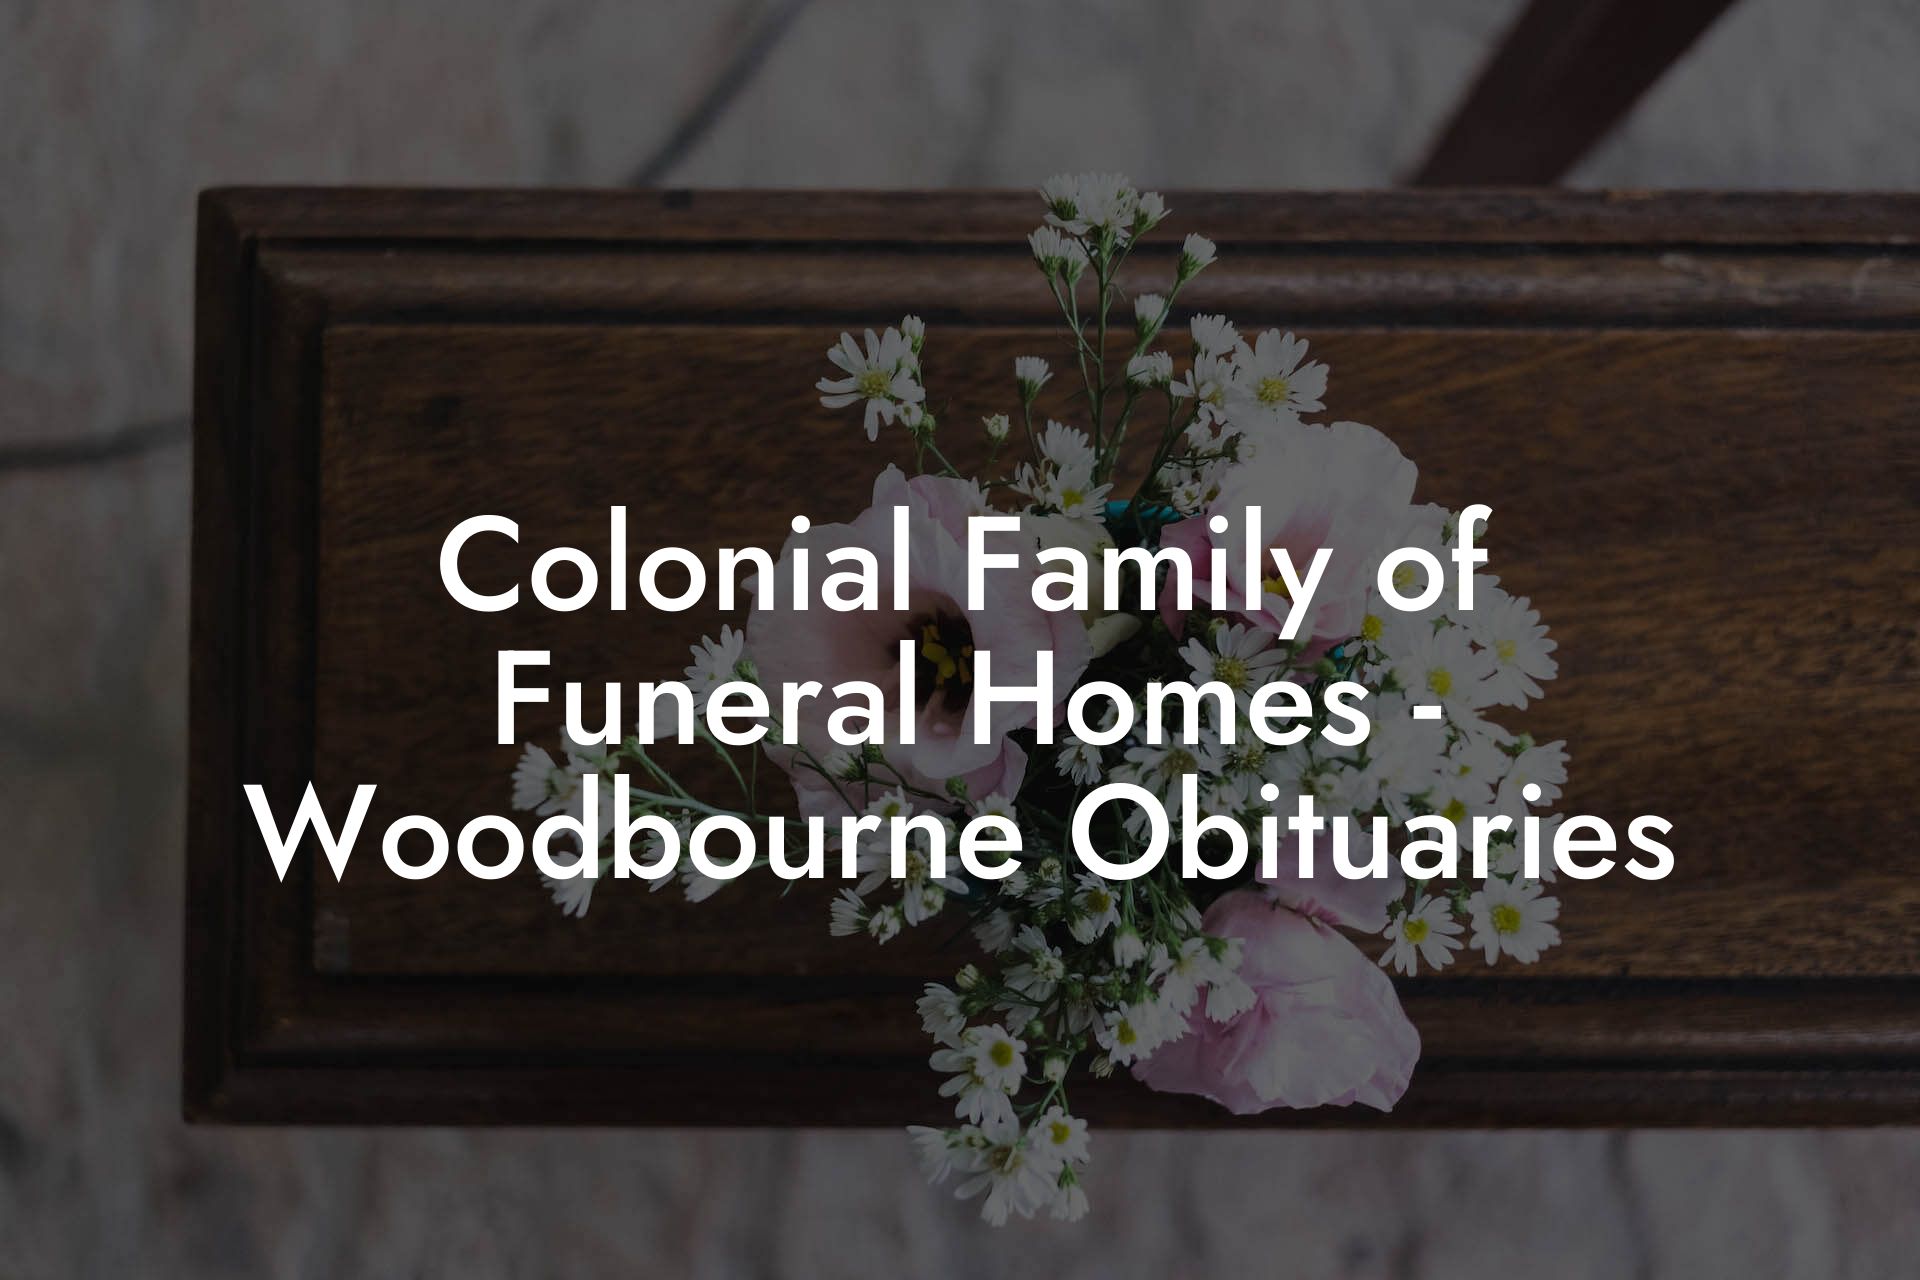 Colonial Family of Funeral Homes - Woodbourne Obituaries